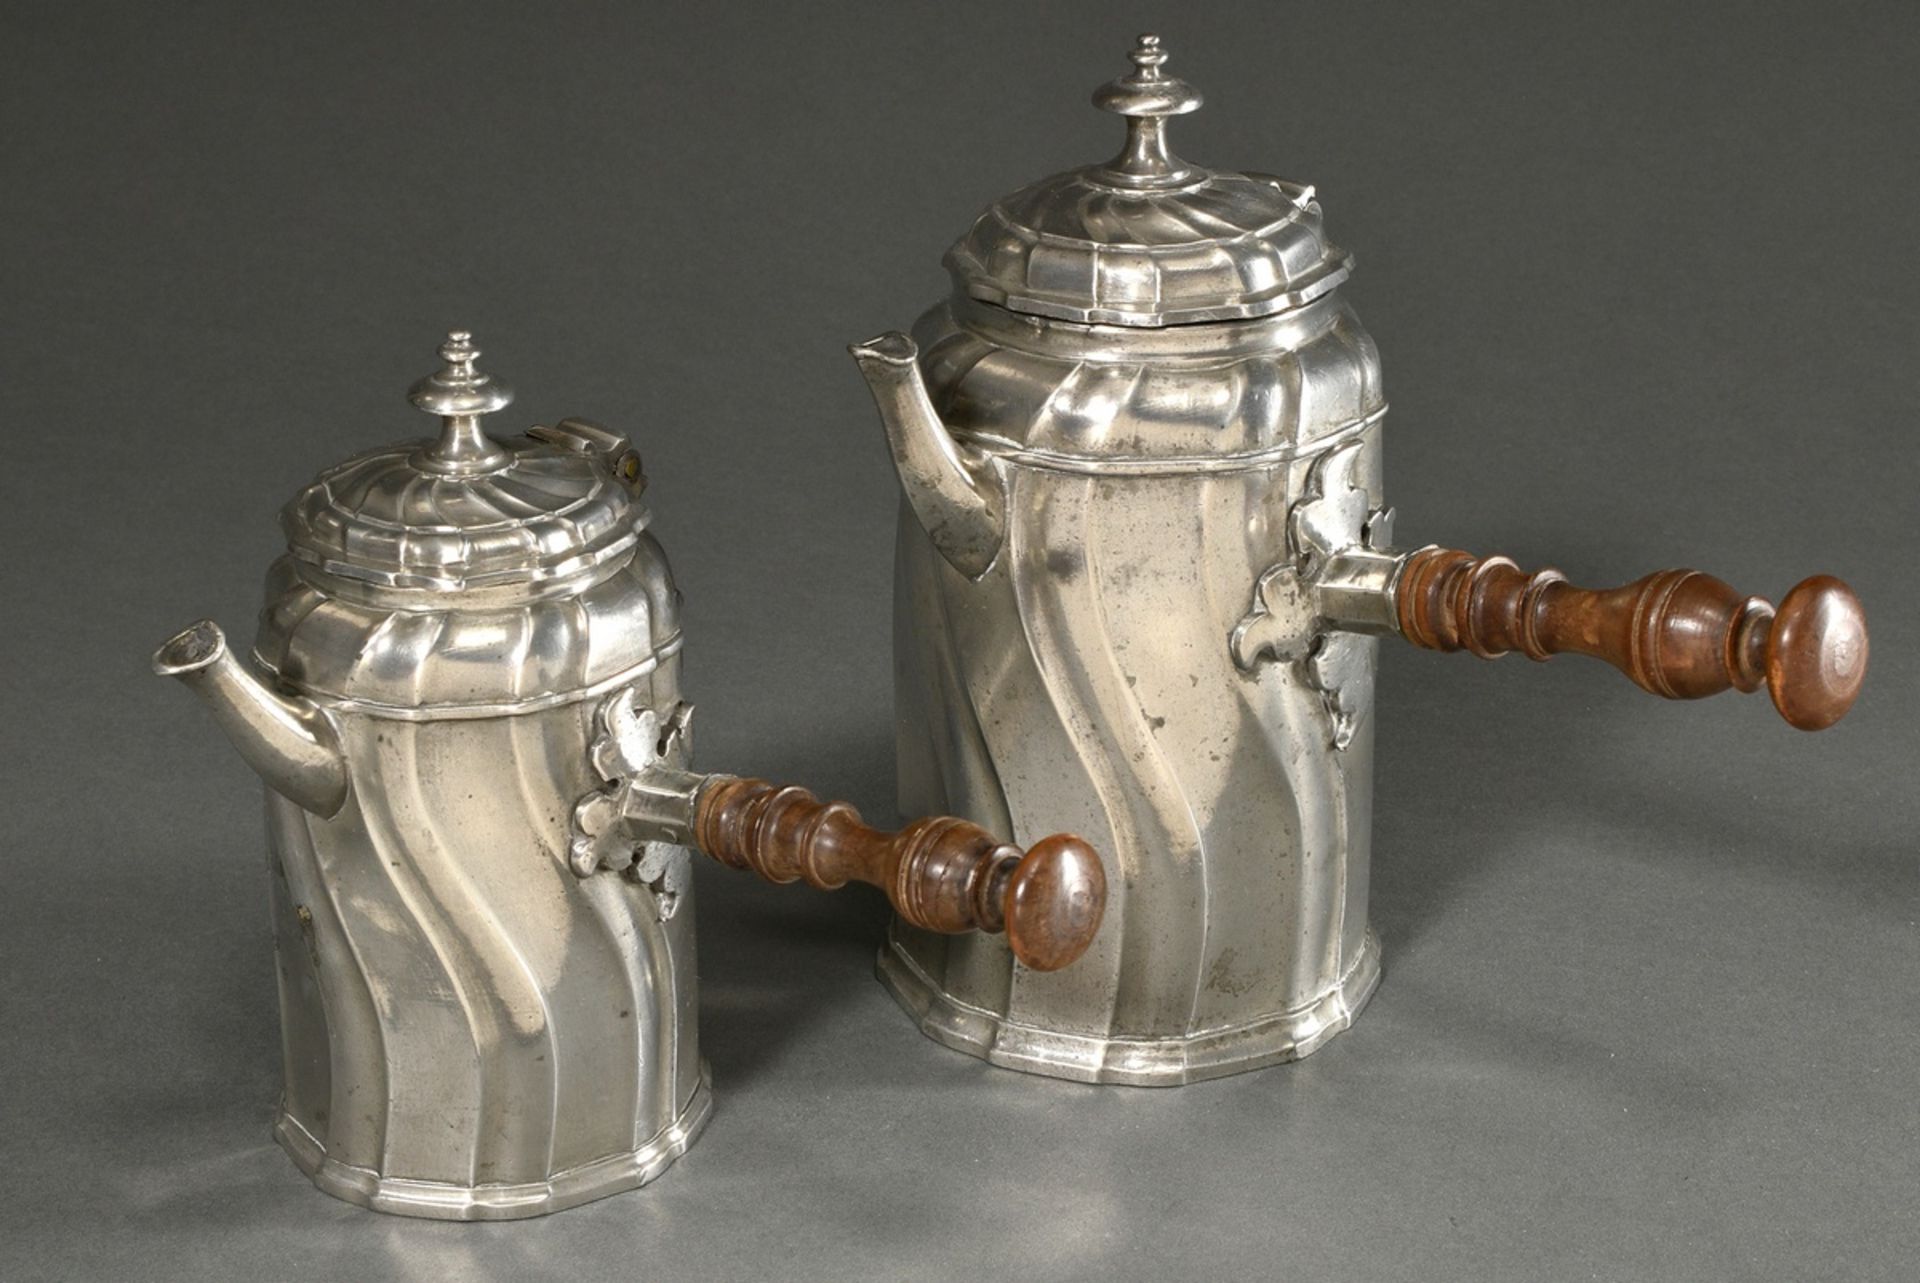 2 various pewter chocolateries with conical body, curved features and wooden handles on the sides, 